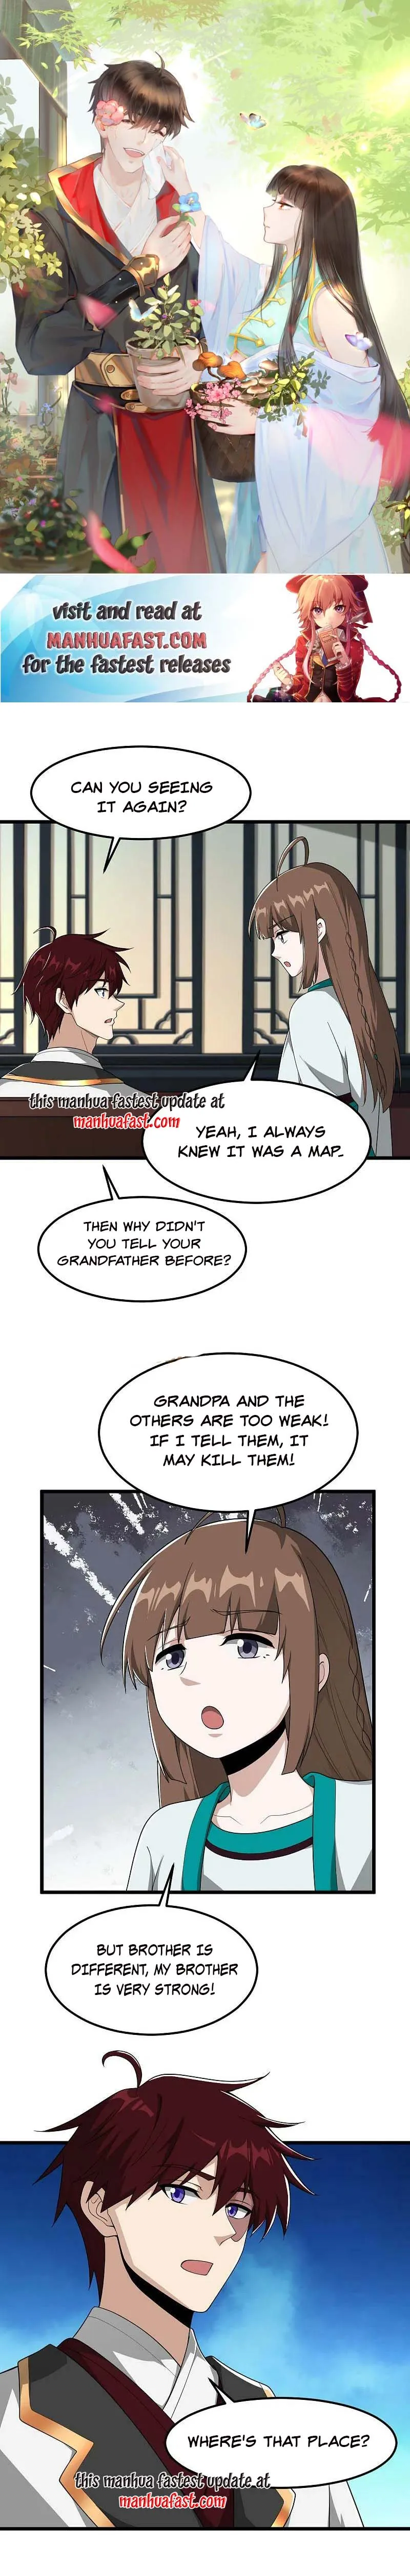 One Sword Reigns Supreme Chapter 319